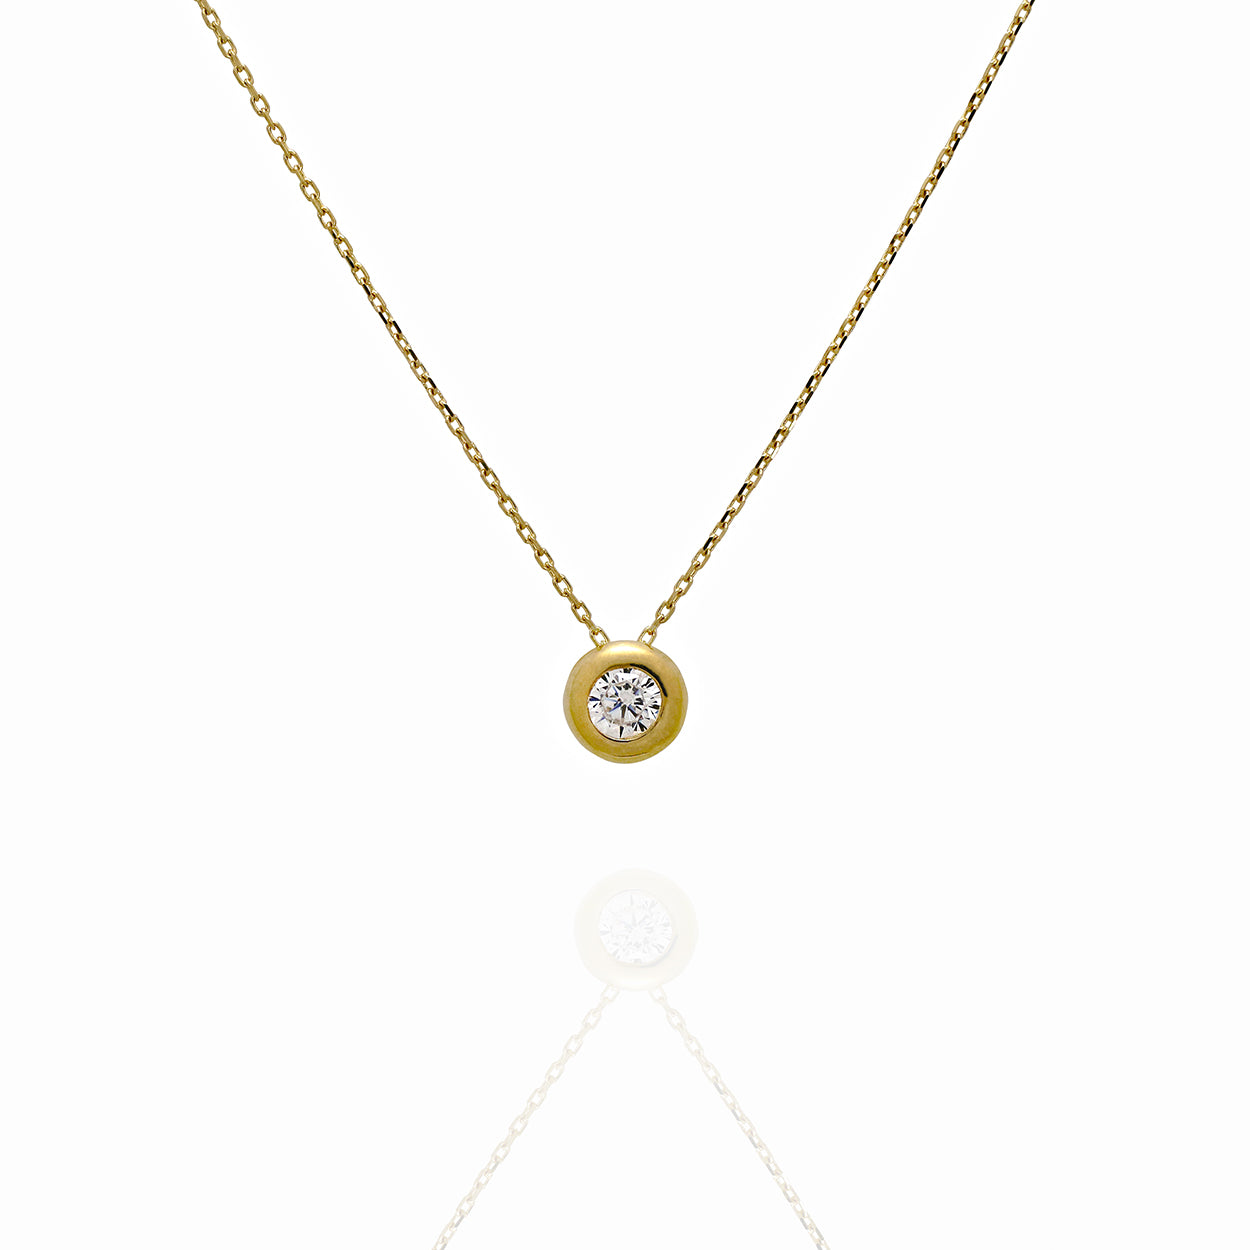 10kt Yellow gold Necklace with bezel Set Cubic Zirconia on a Cable style chain